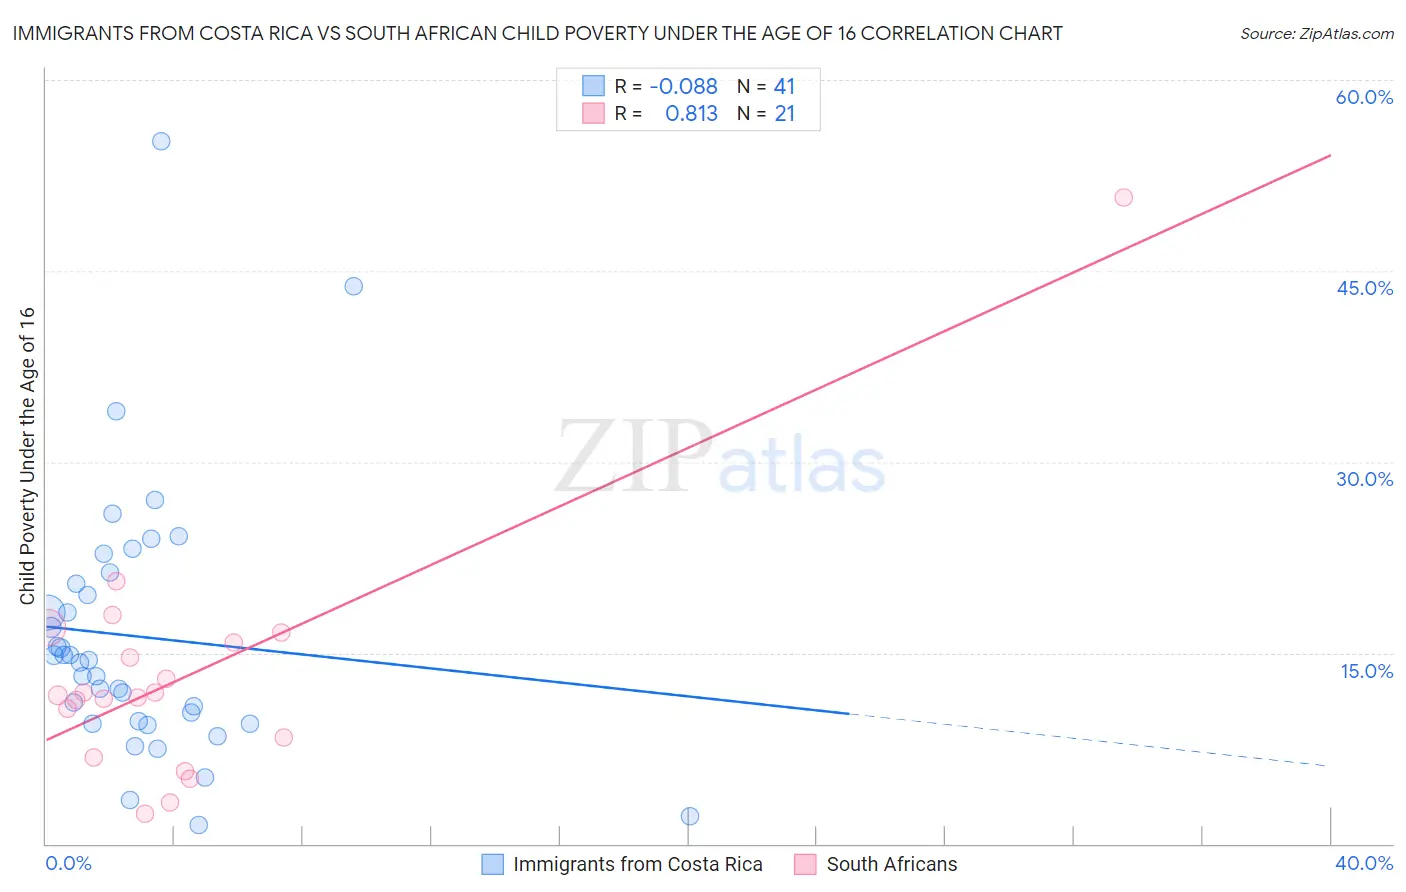 Immigrants from Costa Rica vs South African Child Poverty Under the Age of 16